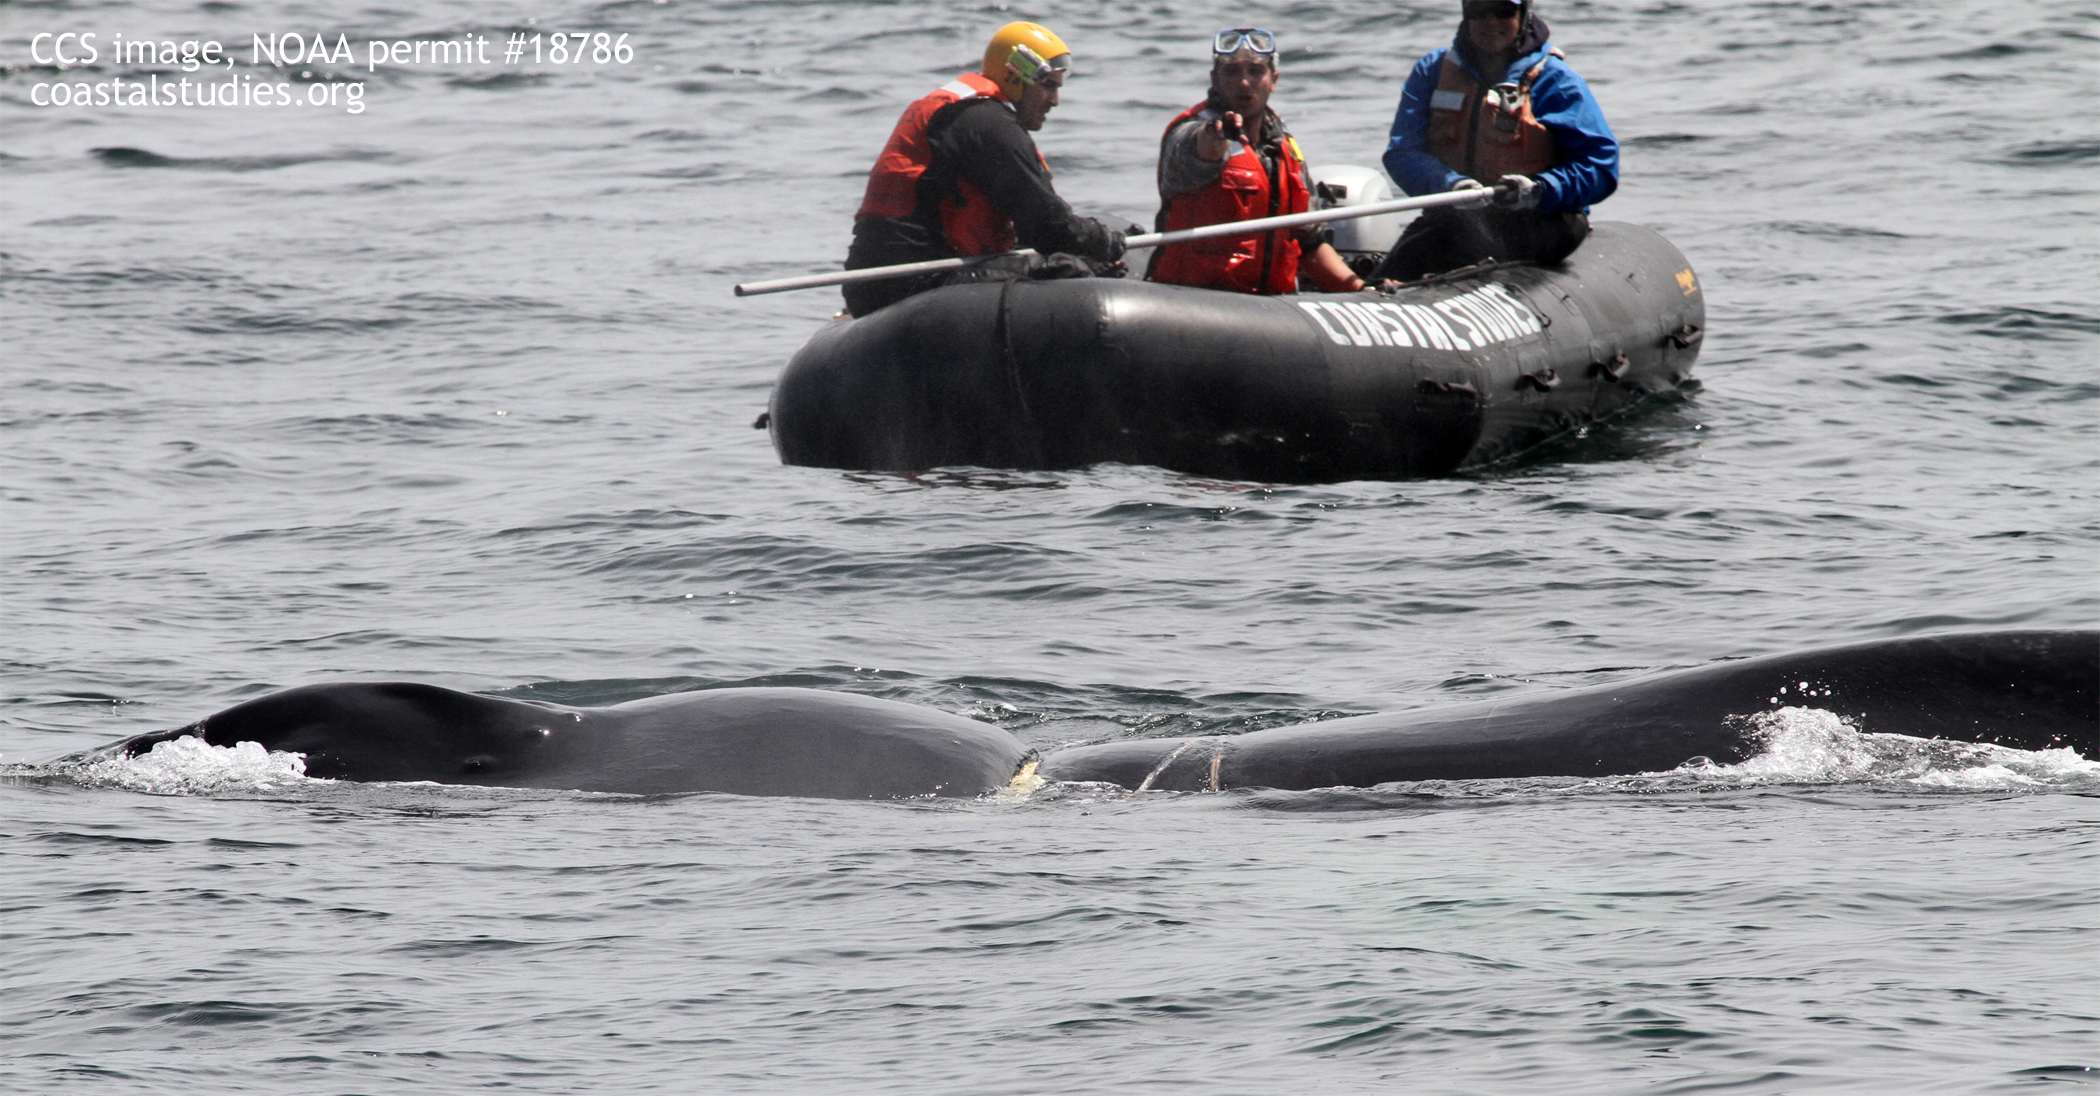 A collar of heavy line remains embedded in the whale's body. CCS image taken under NOAA permit #18786.